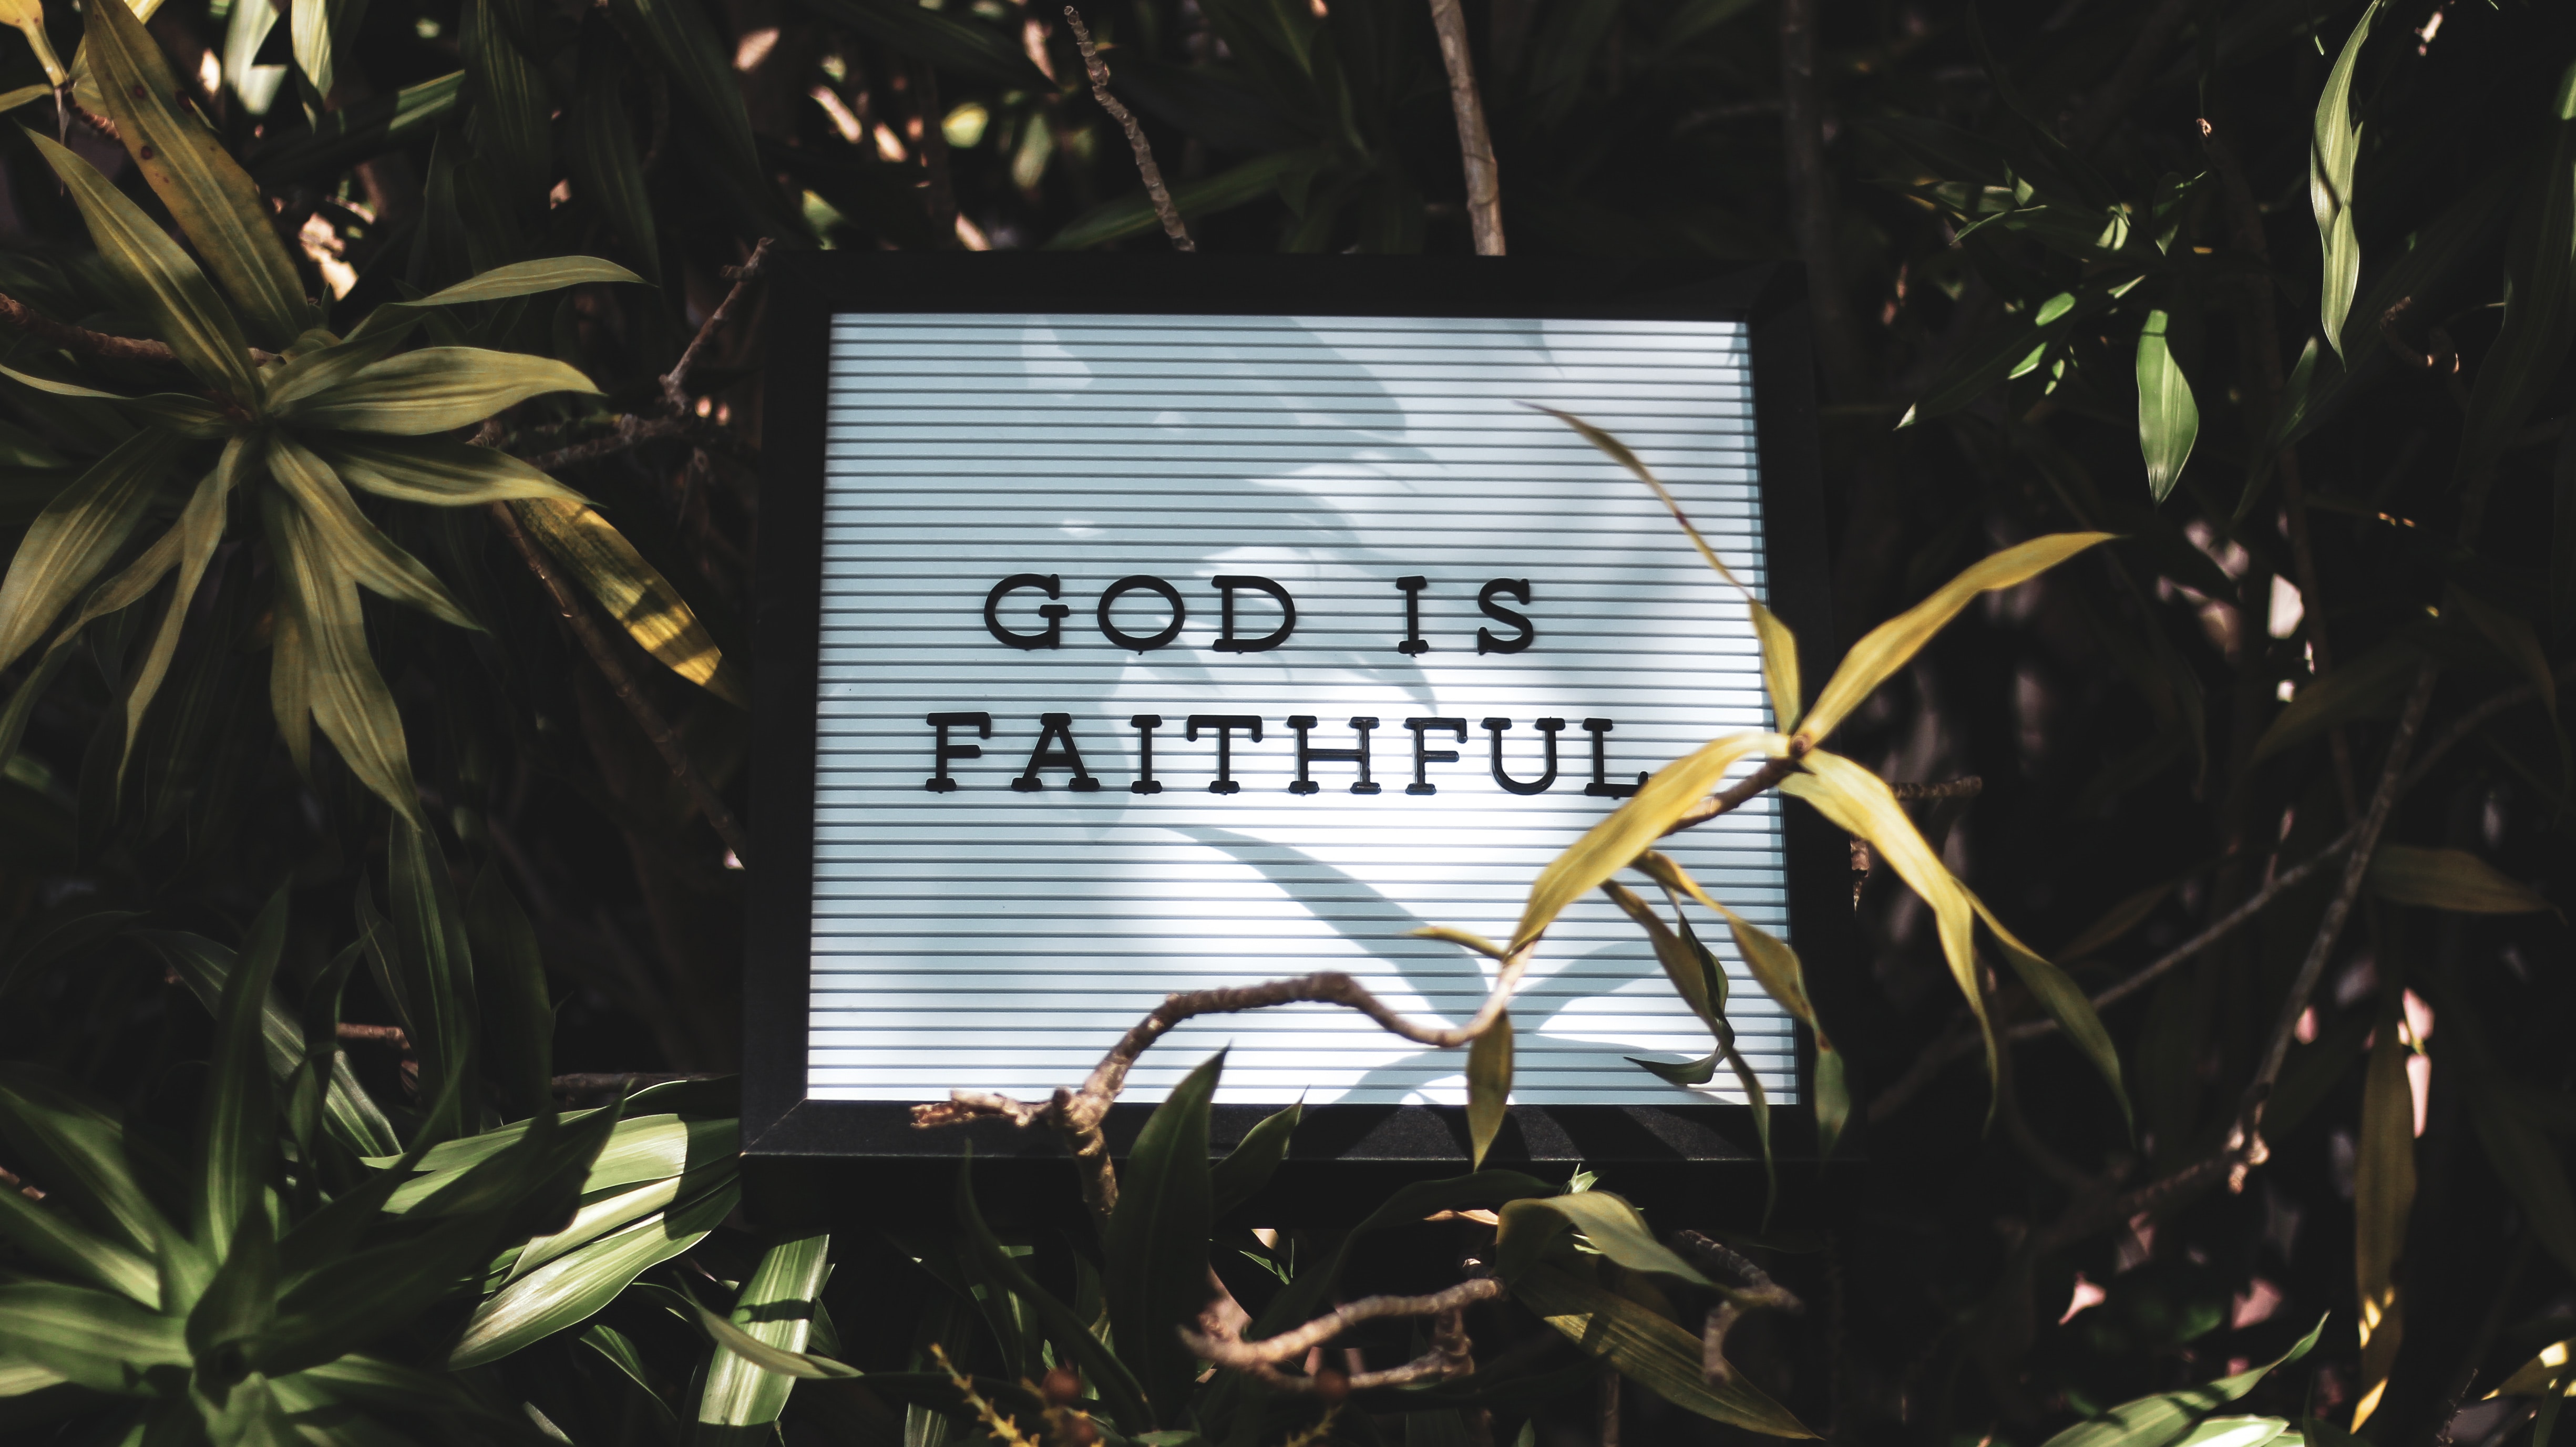 A black framed letter board spells out 'God is faithful' and lays among green plants with a soft light focusing down on it, casting shadows from some of the plants. God is indeed faithful and trustworthy.